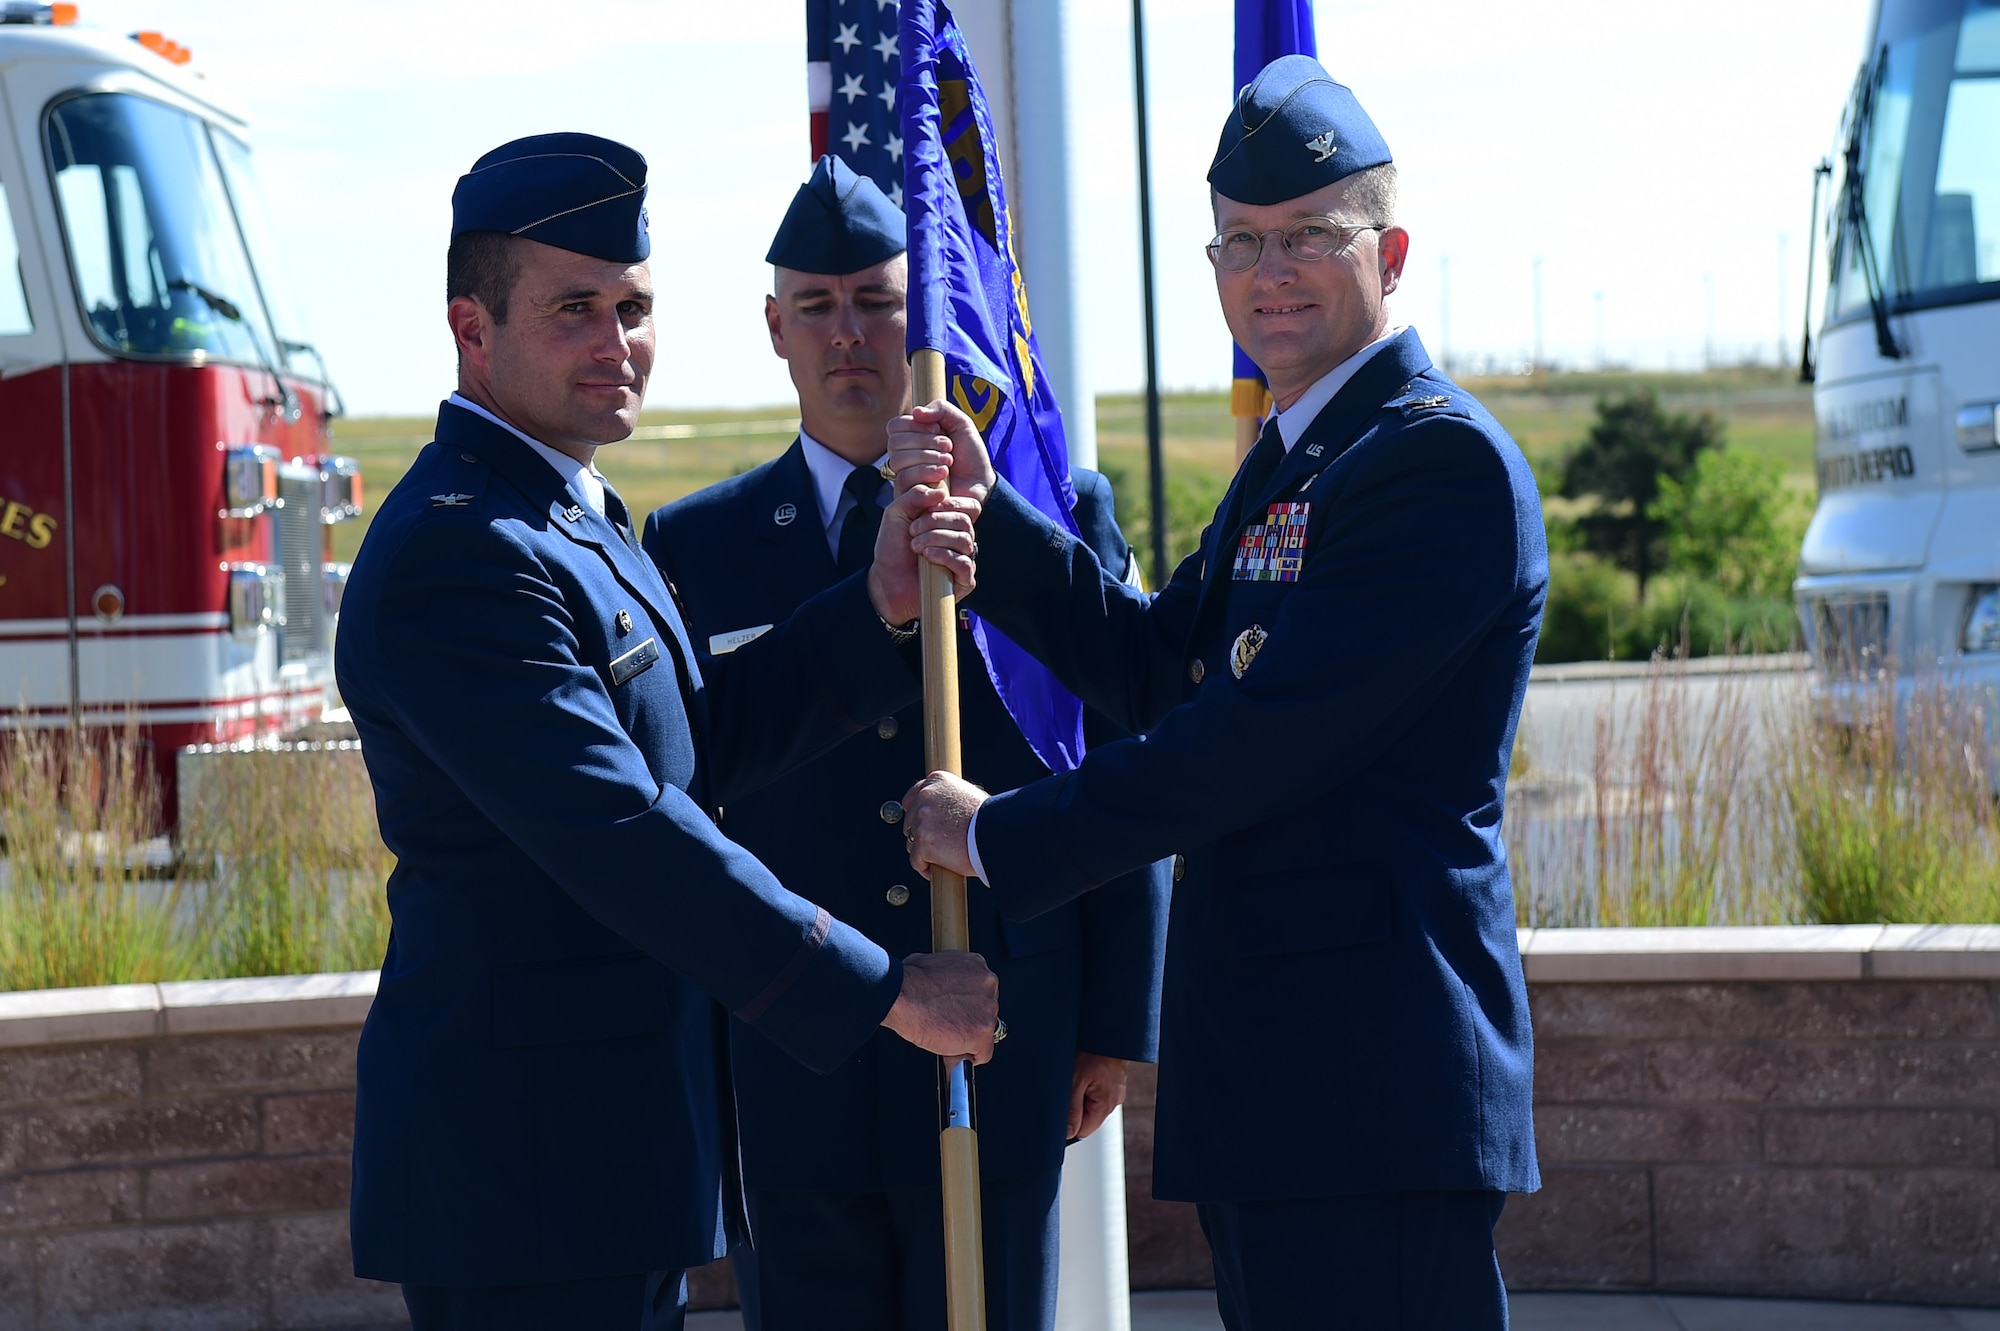 Col. Shawn Thompson, Commander of the 460th Mission Support Group, assumes command August 1, 2016, during the MSG change of command on Buckley Air Force Base, Colo. A change of command ceremony represents the formal transfer of responsibility from an outgoing commander to their successor. (U.S. Air Force photo by Airman 1st Class Gabrielle Spradling/Released)